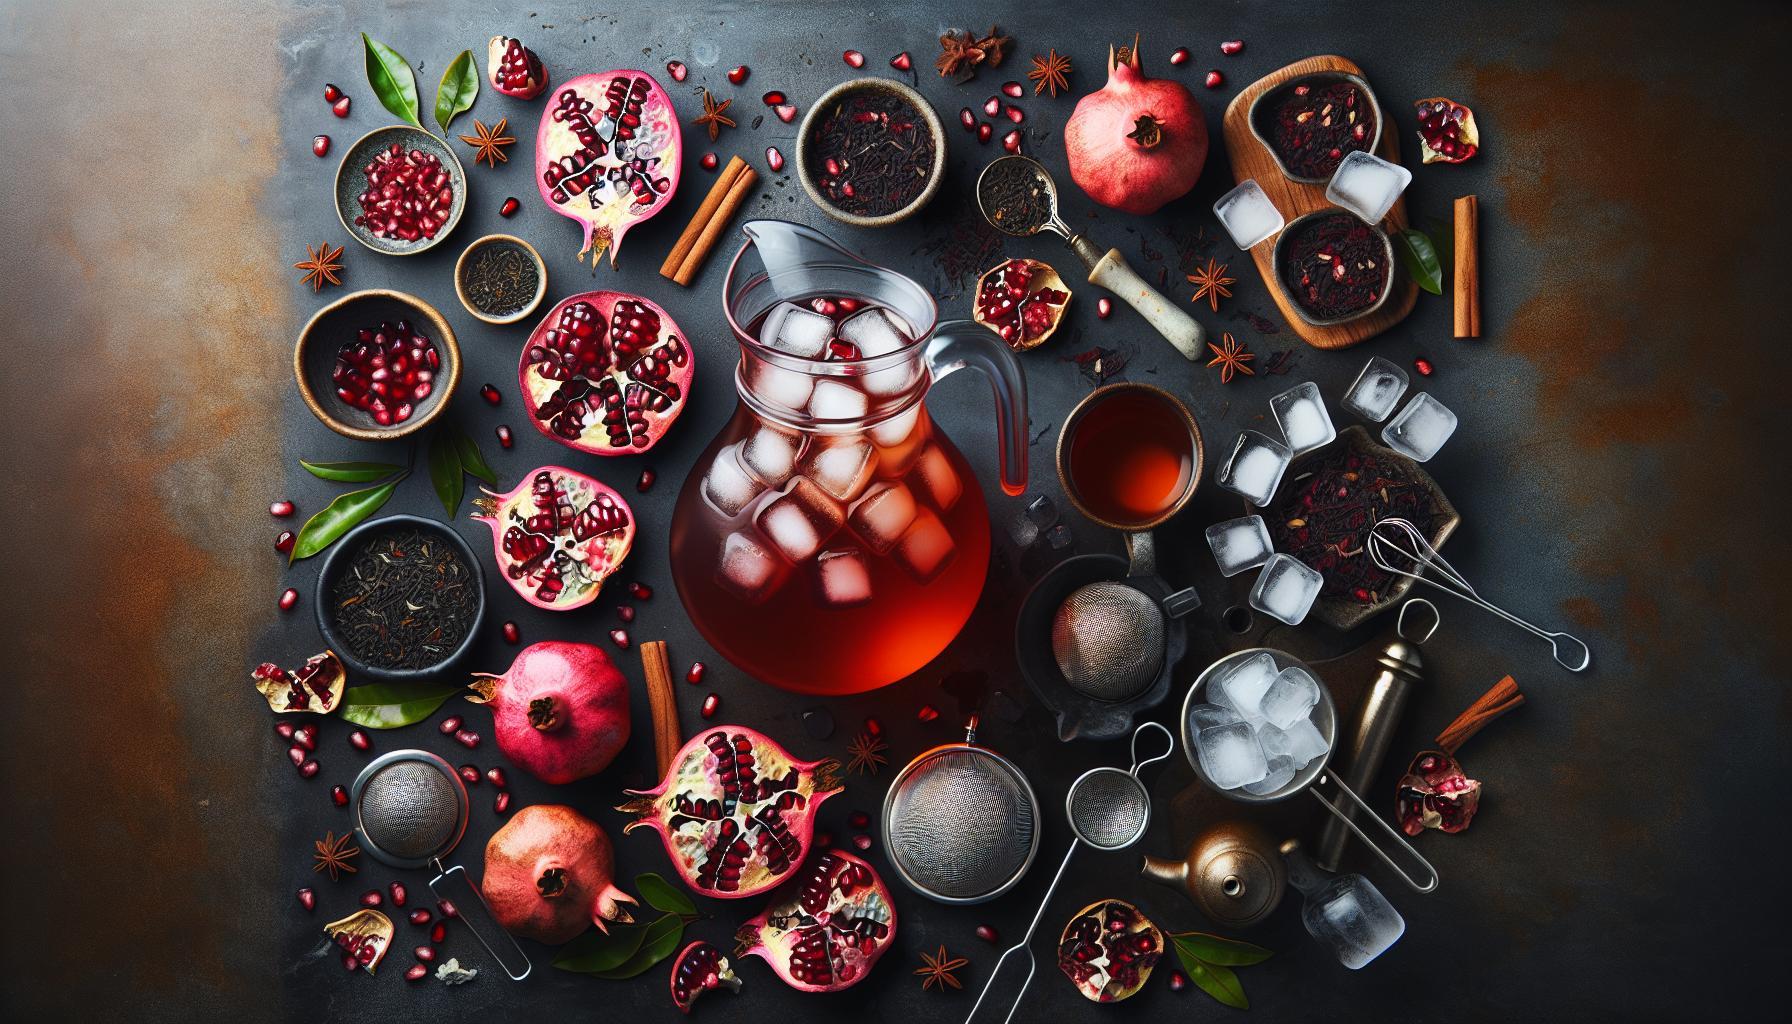 Refreshing Summer Sip: How to Make Iced Hibiscus Tea with Pomegranate – Easy & Delicious Recipe!